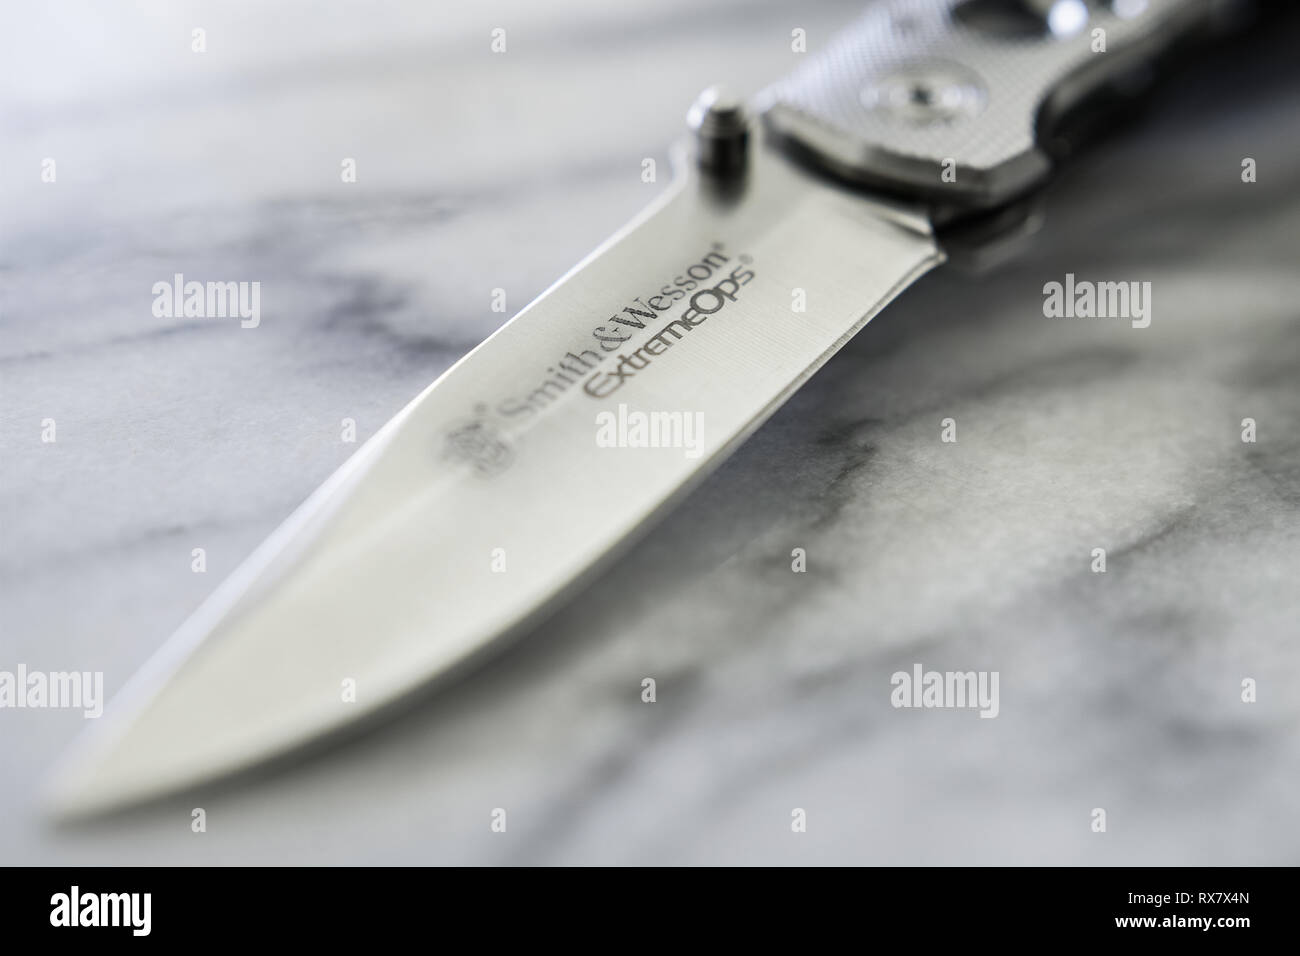 A closer view of the blade of this S&W folding knife Extreme Ops, on a marble clear surface. Stock Photo